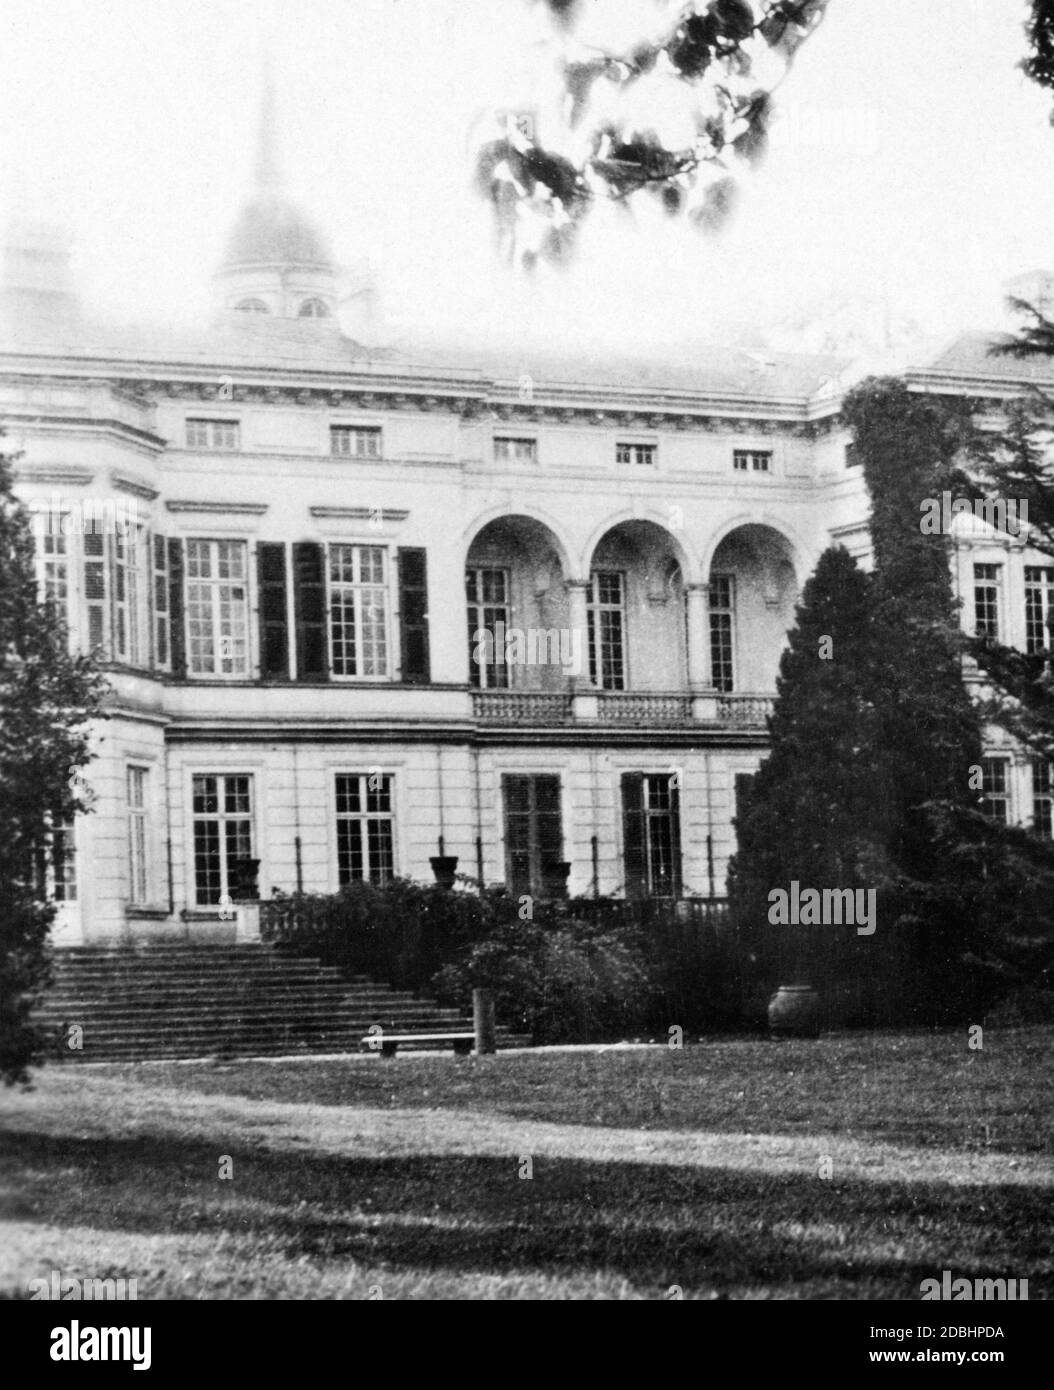 The photograph from October 16, 1929 shows the Palais Schaumburg in Bonn, where Princess Viktoria of Prussia lived until 1928. She had previously been married to Adolf of Schaumburg-Lippe, later to Alexander Zoubkoff. She got into debt, resulting in the withdrawal of her right of residence and her inventory was auctioned off in 1929. Stock Photo